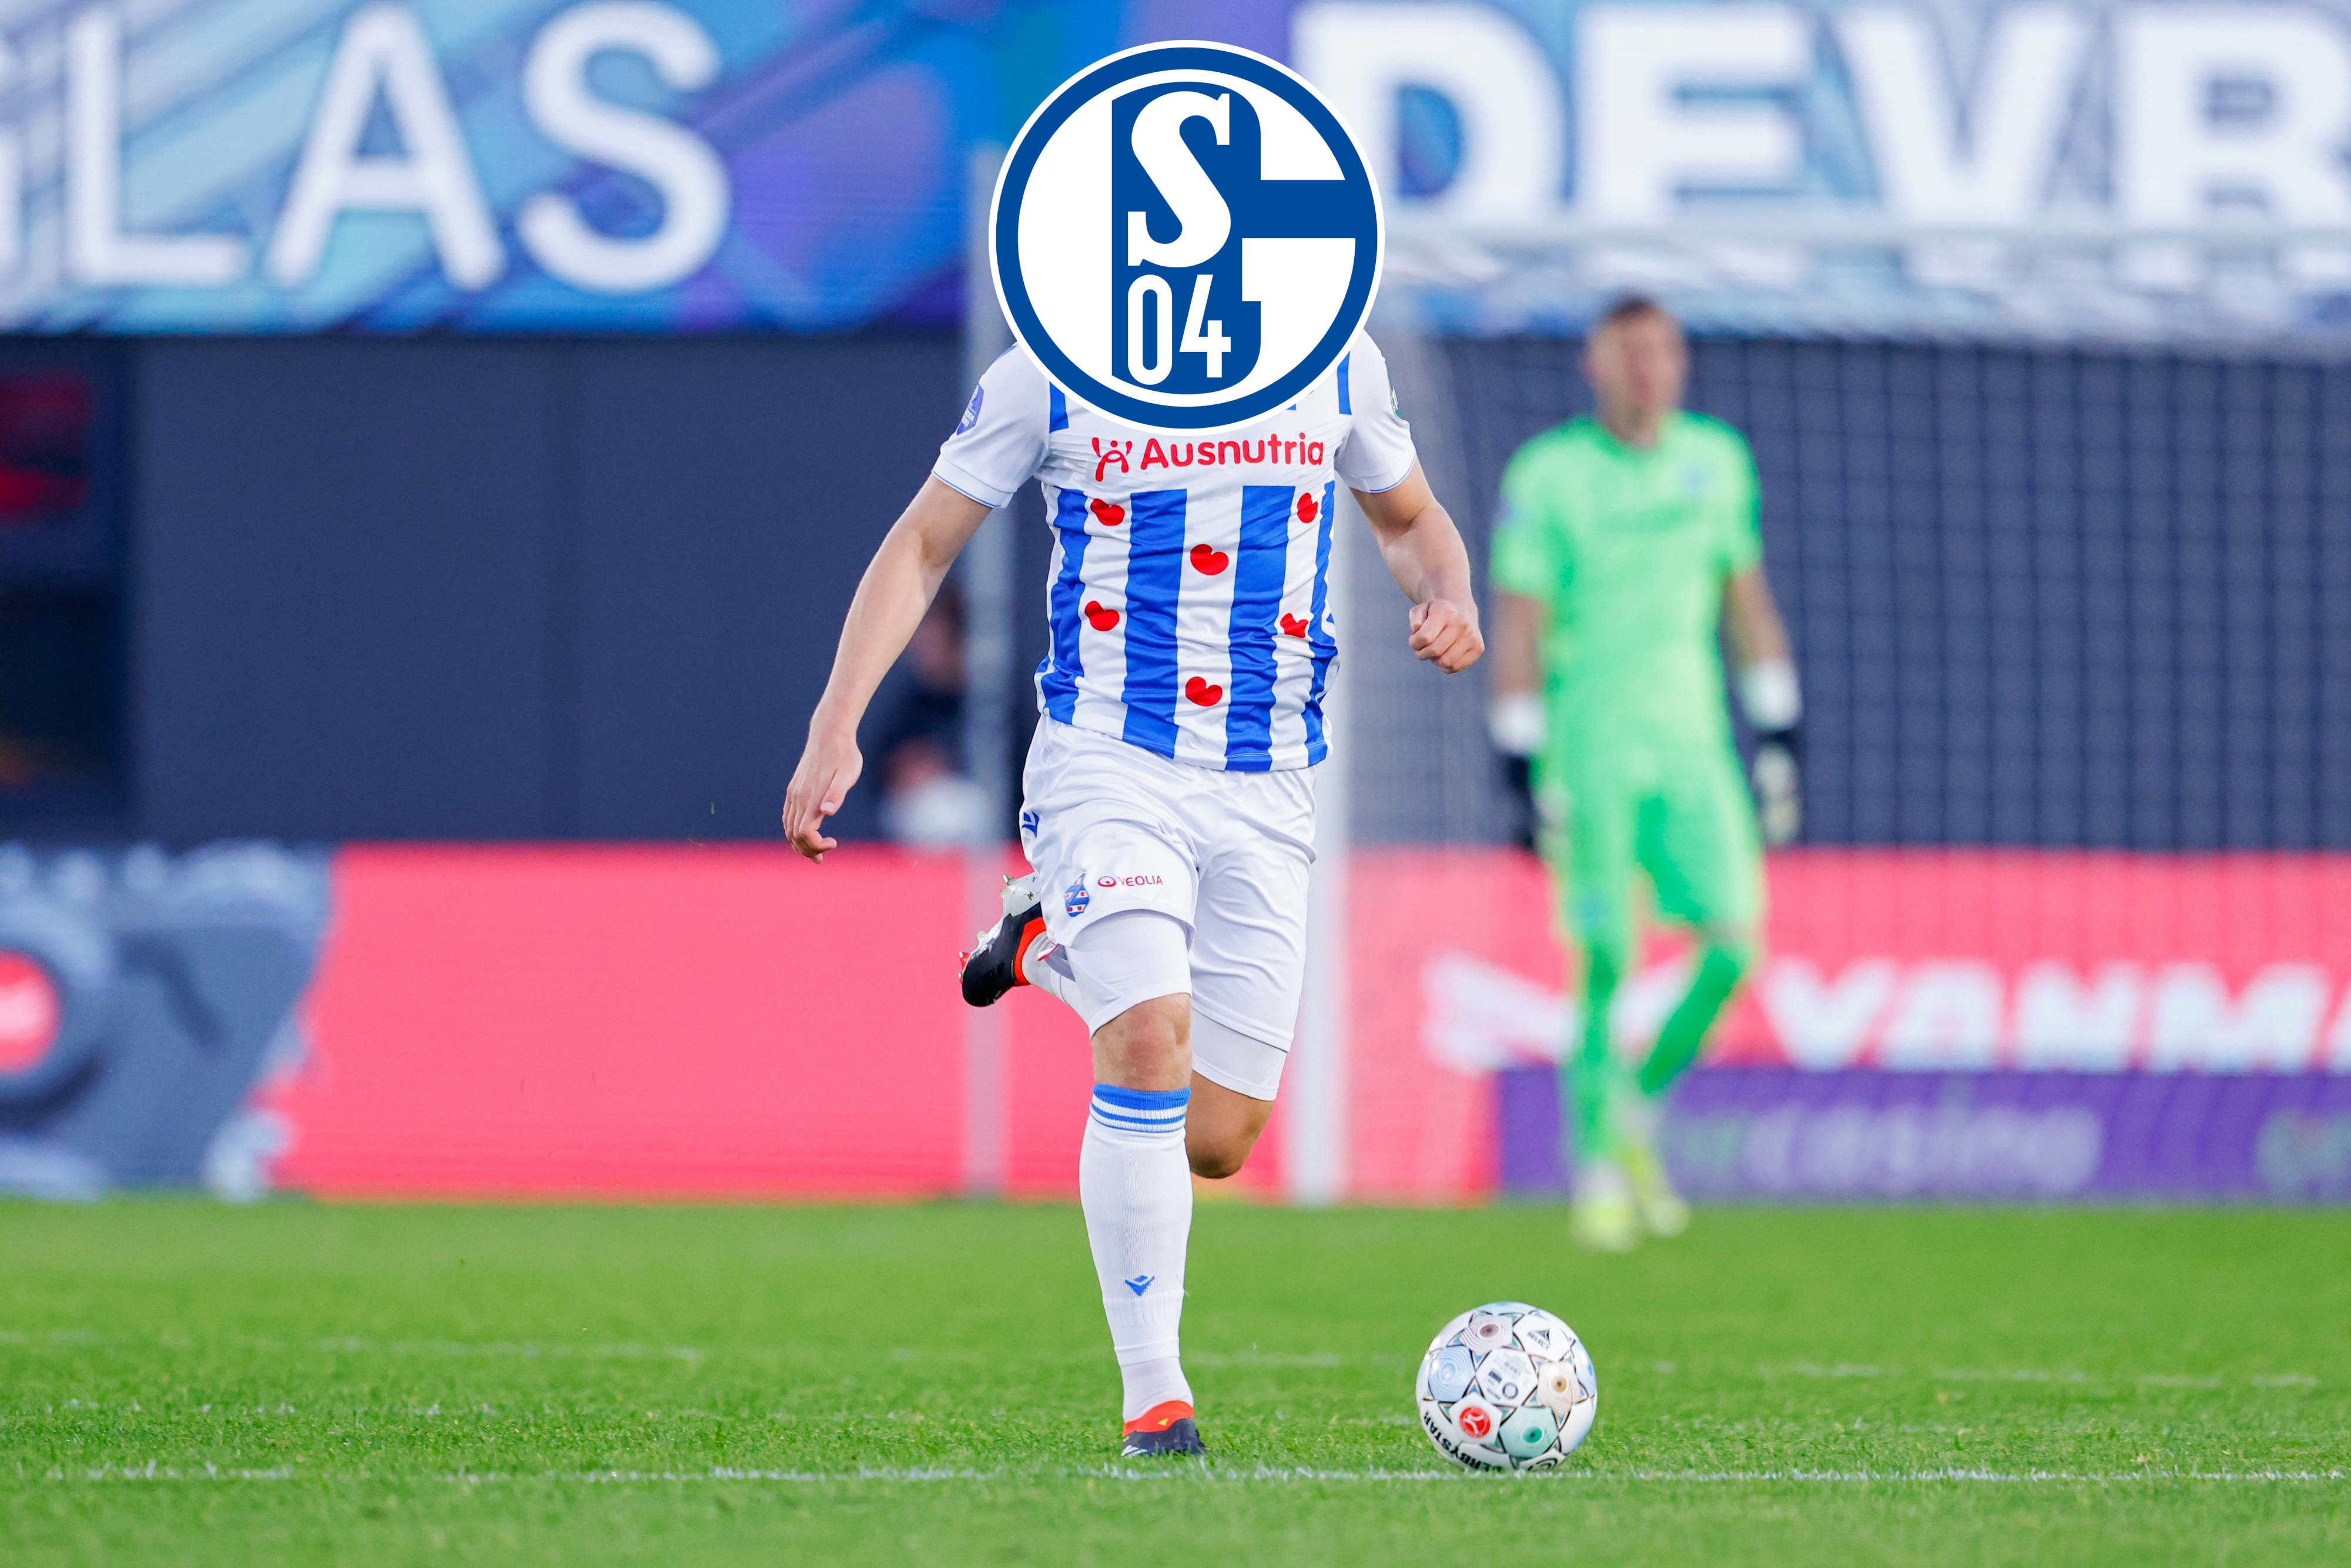 FC Schalke 04 transfer ahead with membership shake-up – will S04 now be part of IHM?